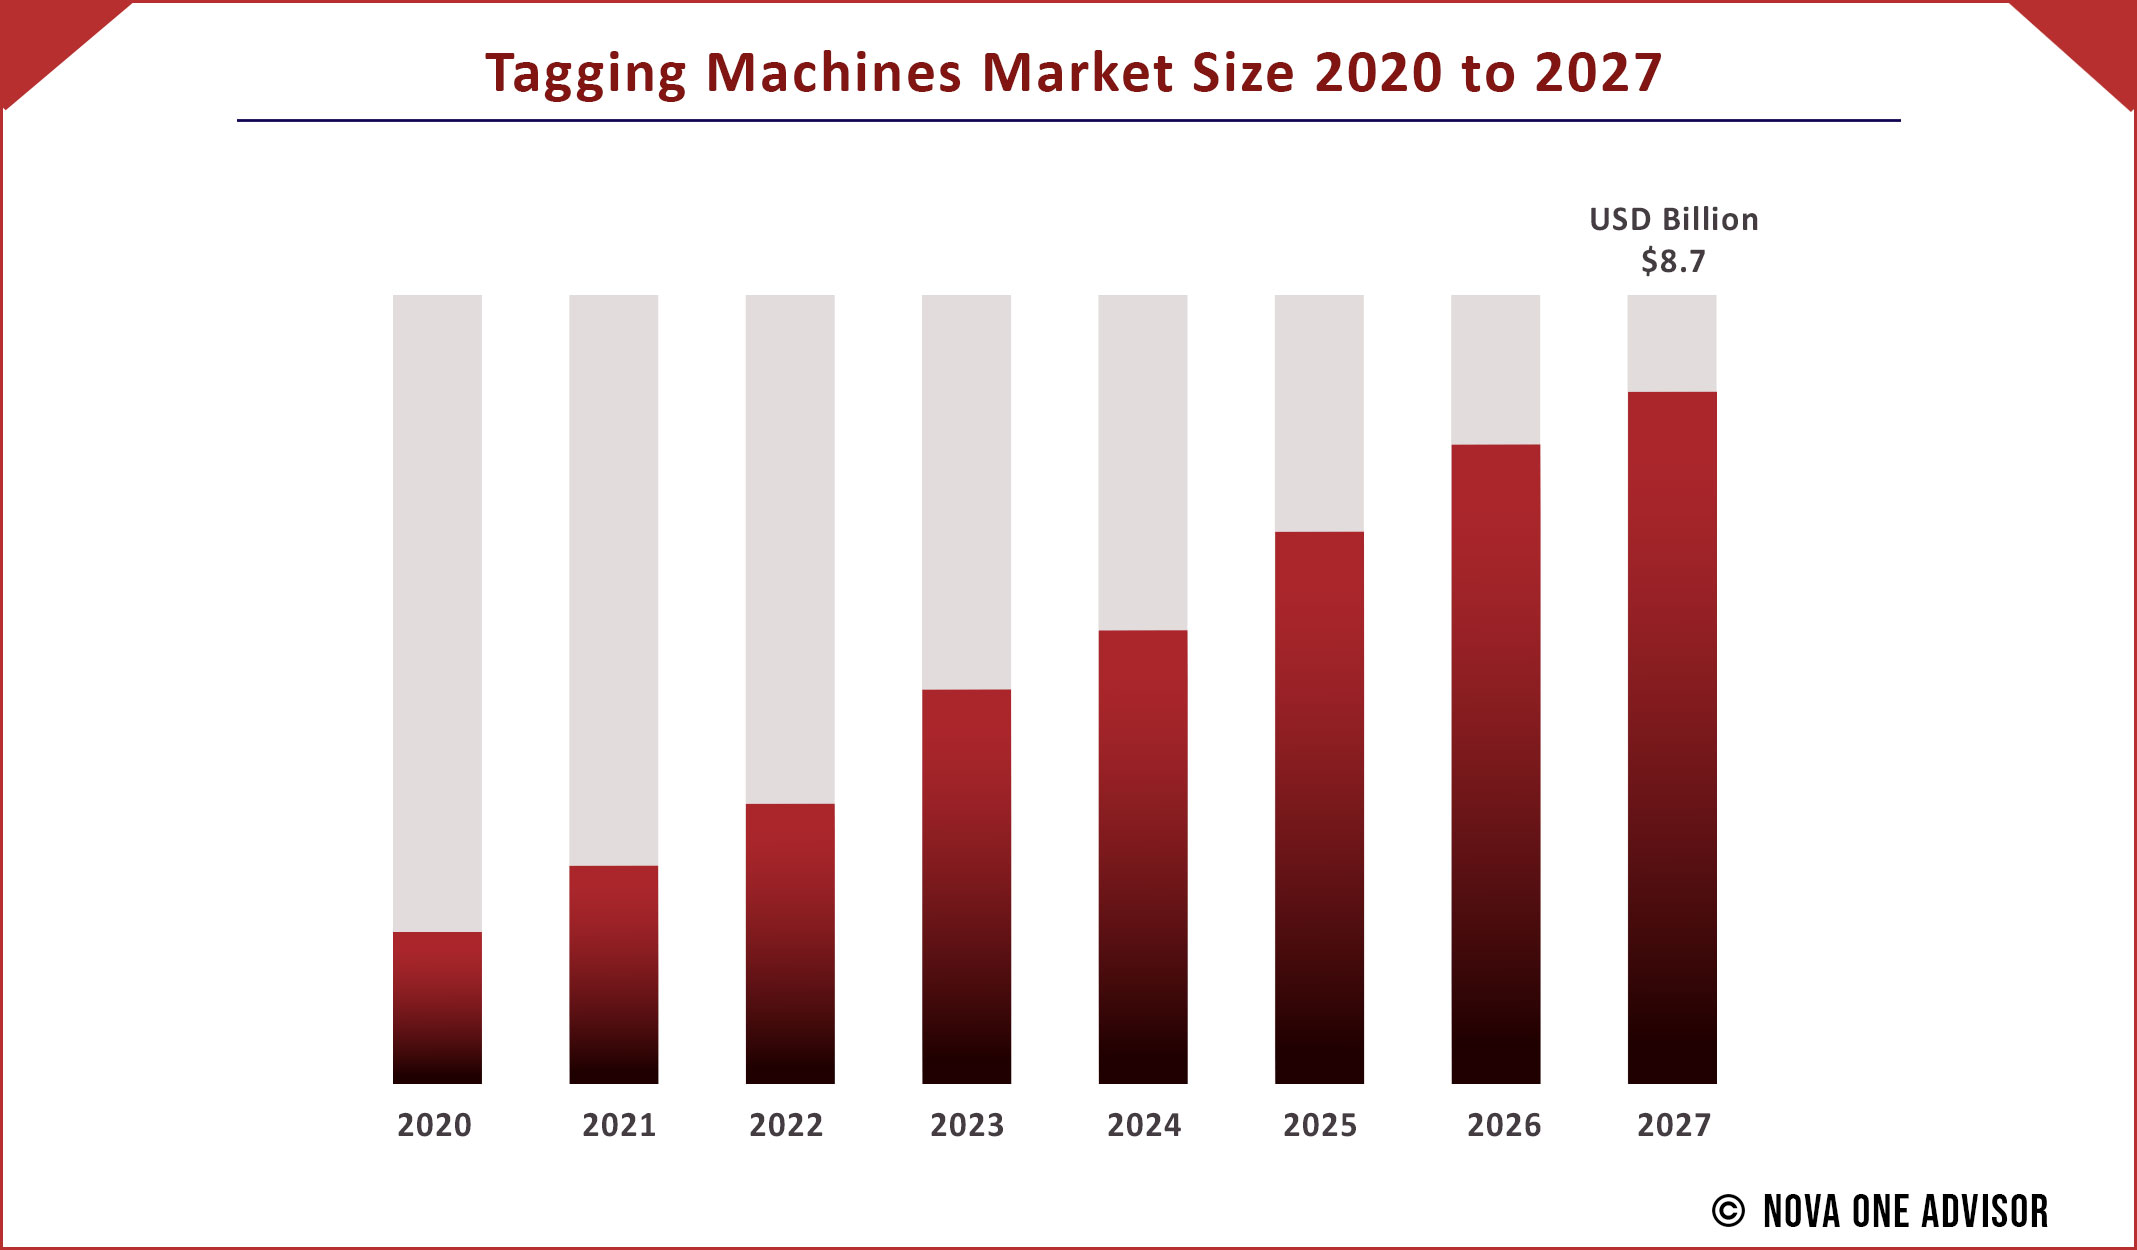 Tagging Machines Market Size 2020 to 2027